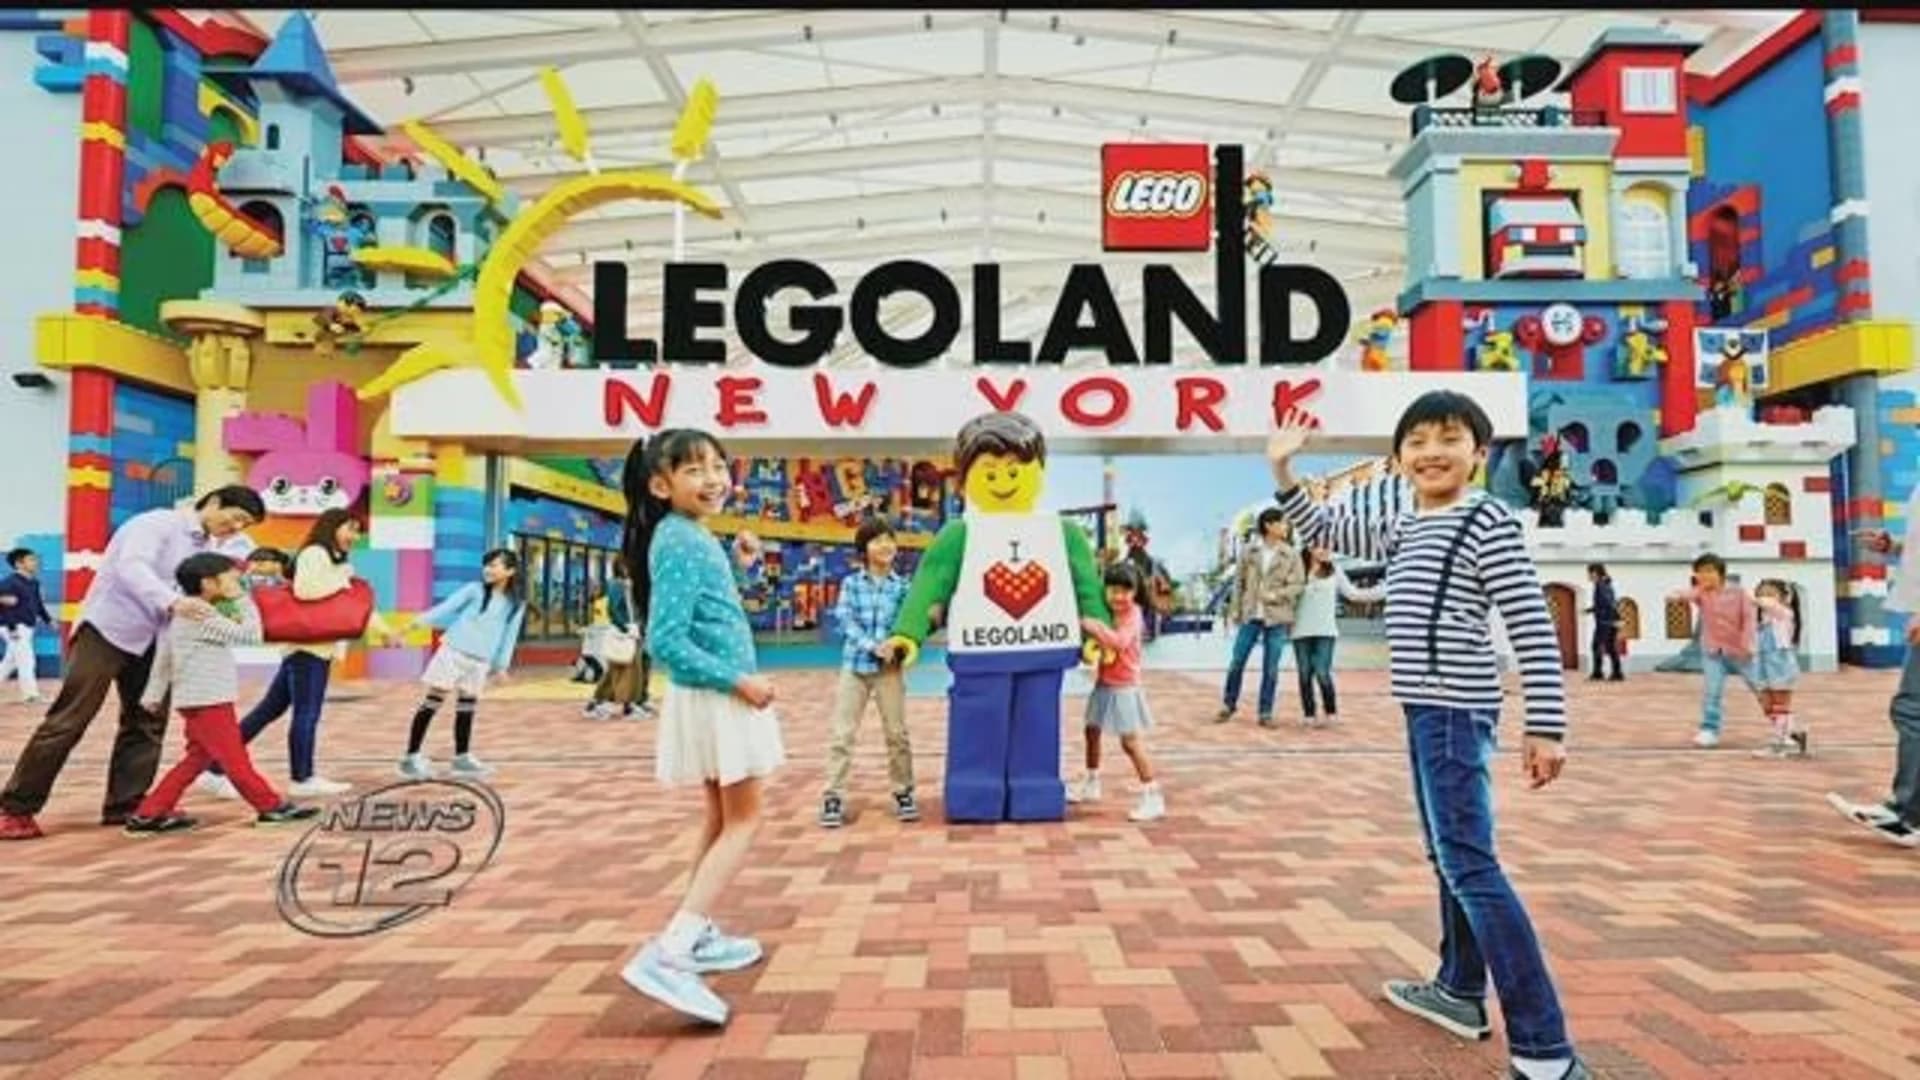 Orange County weighs $1M plan to advertise for Legoland